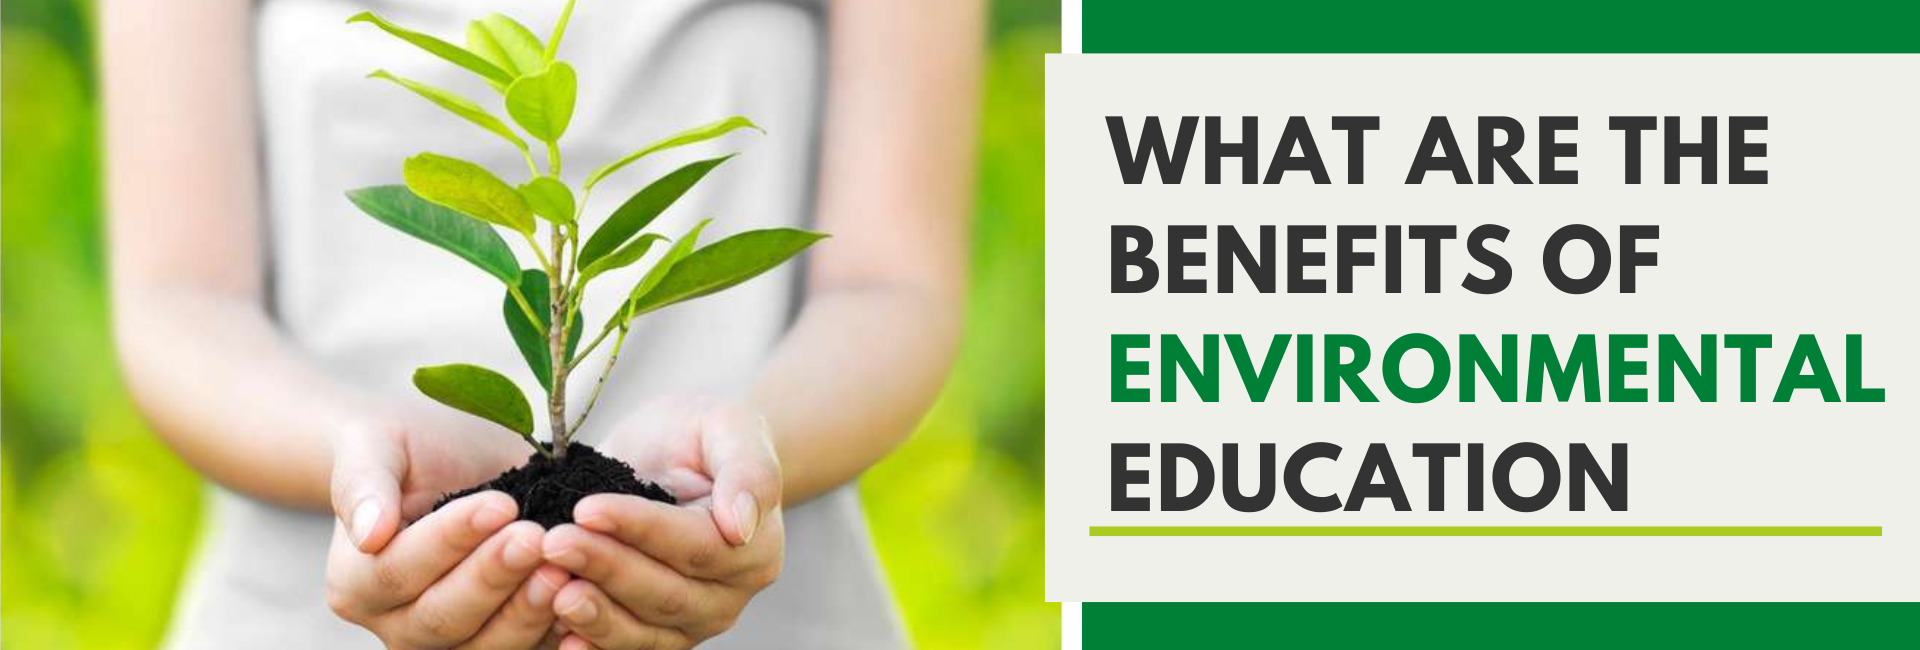 What Are The Benefits Of Environmental Education